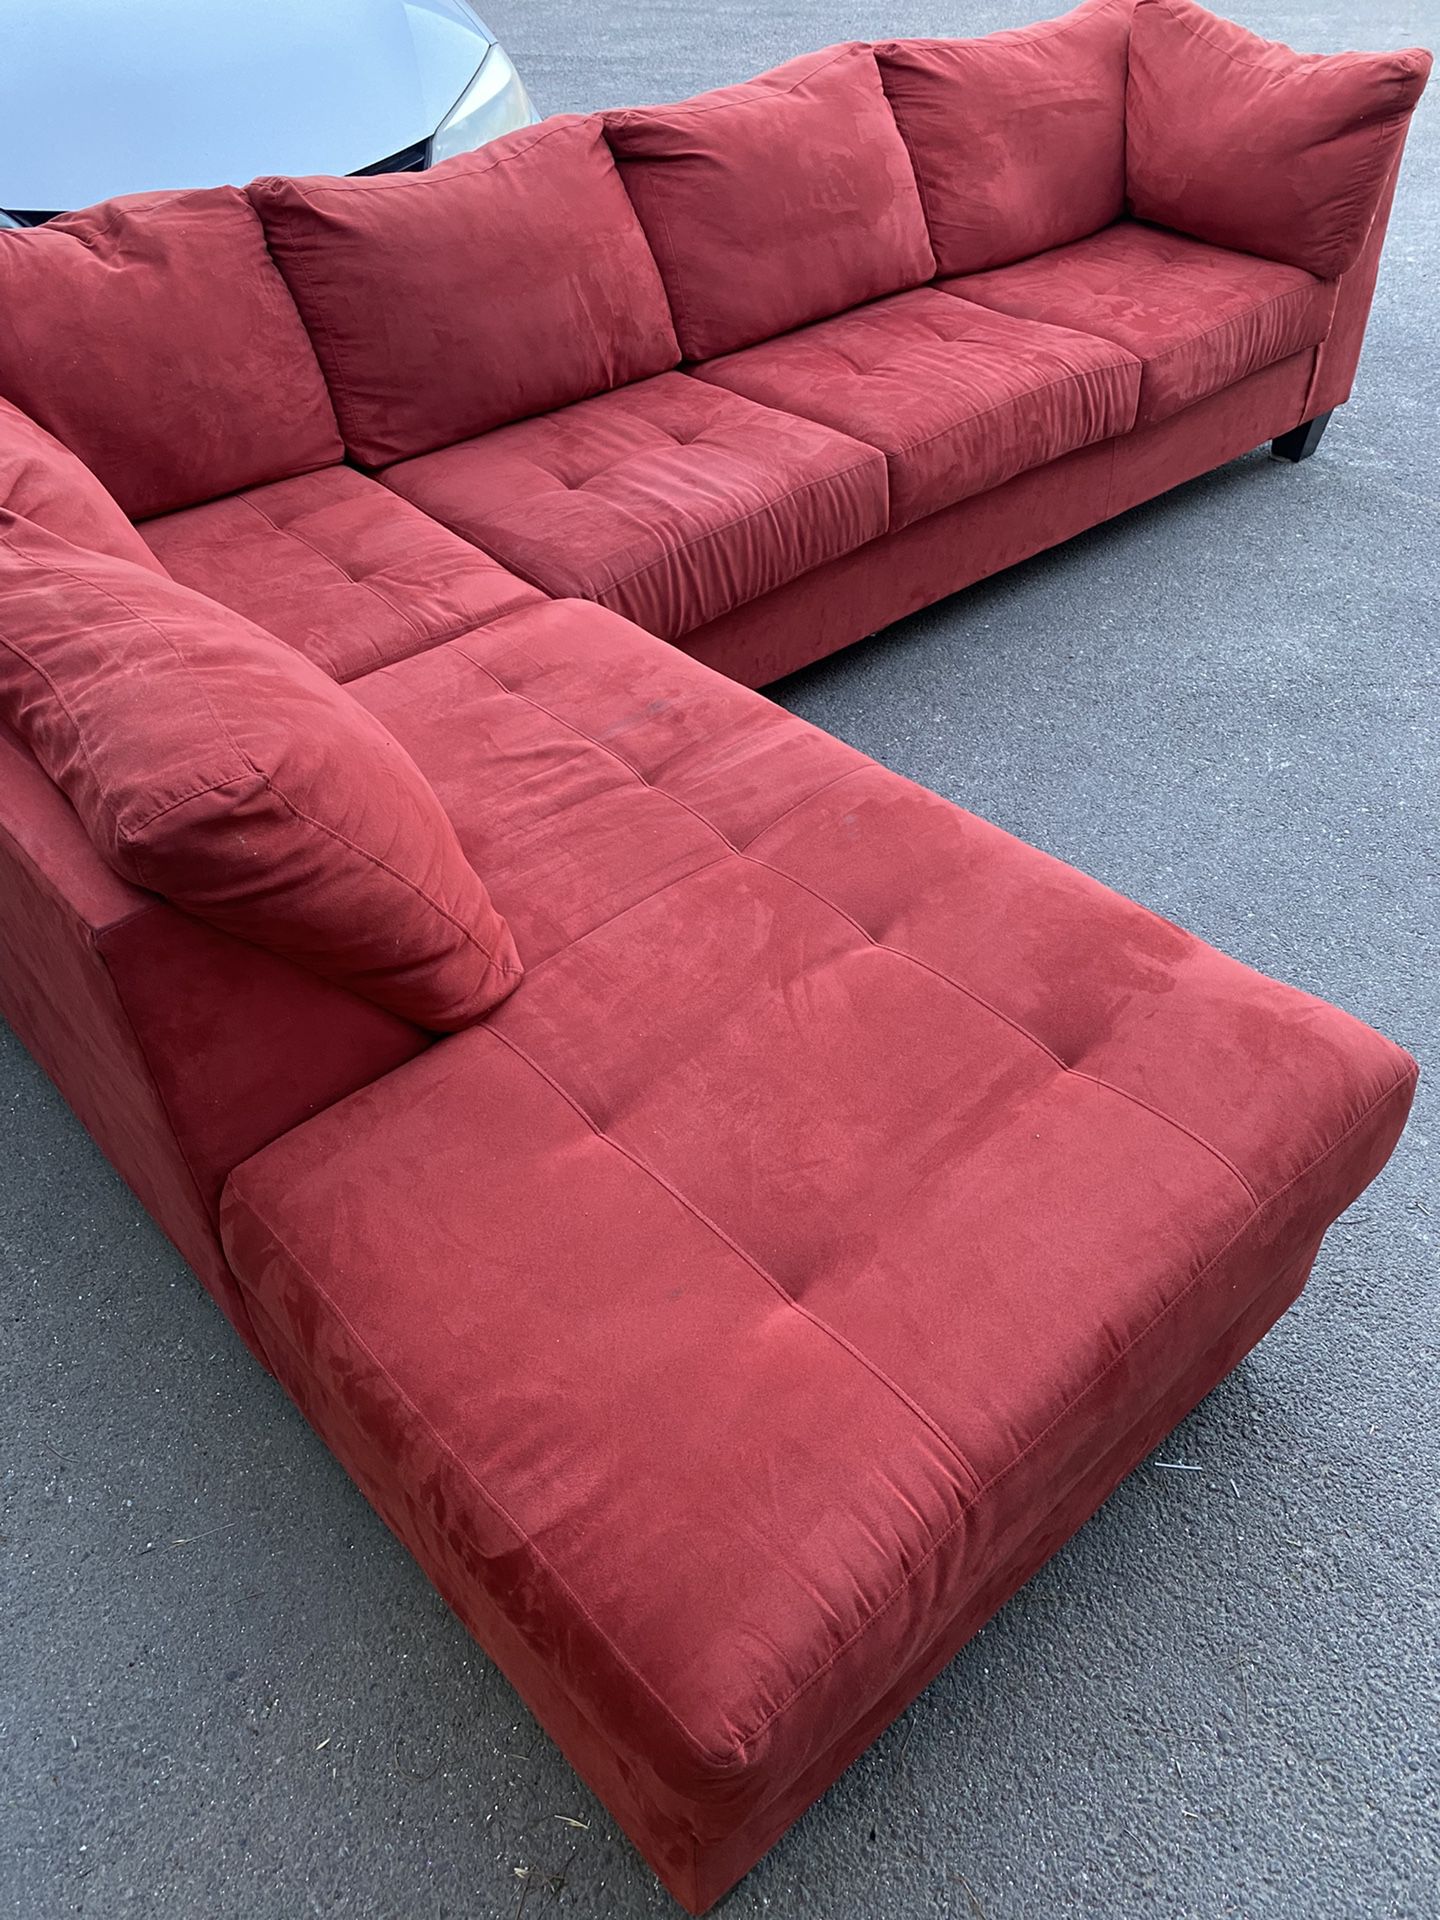 2 Pc Red Couch 